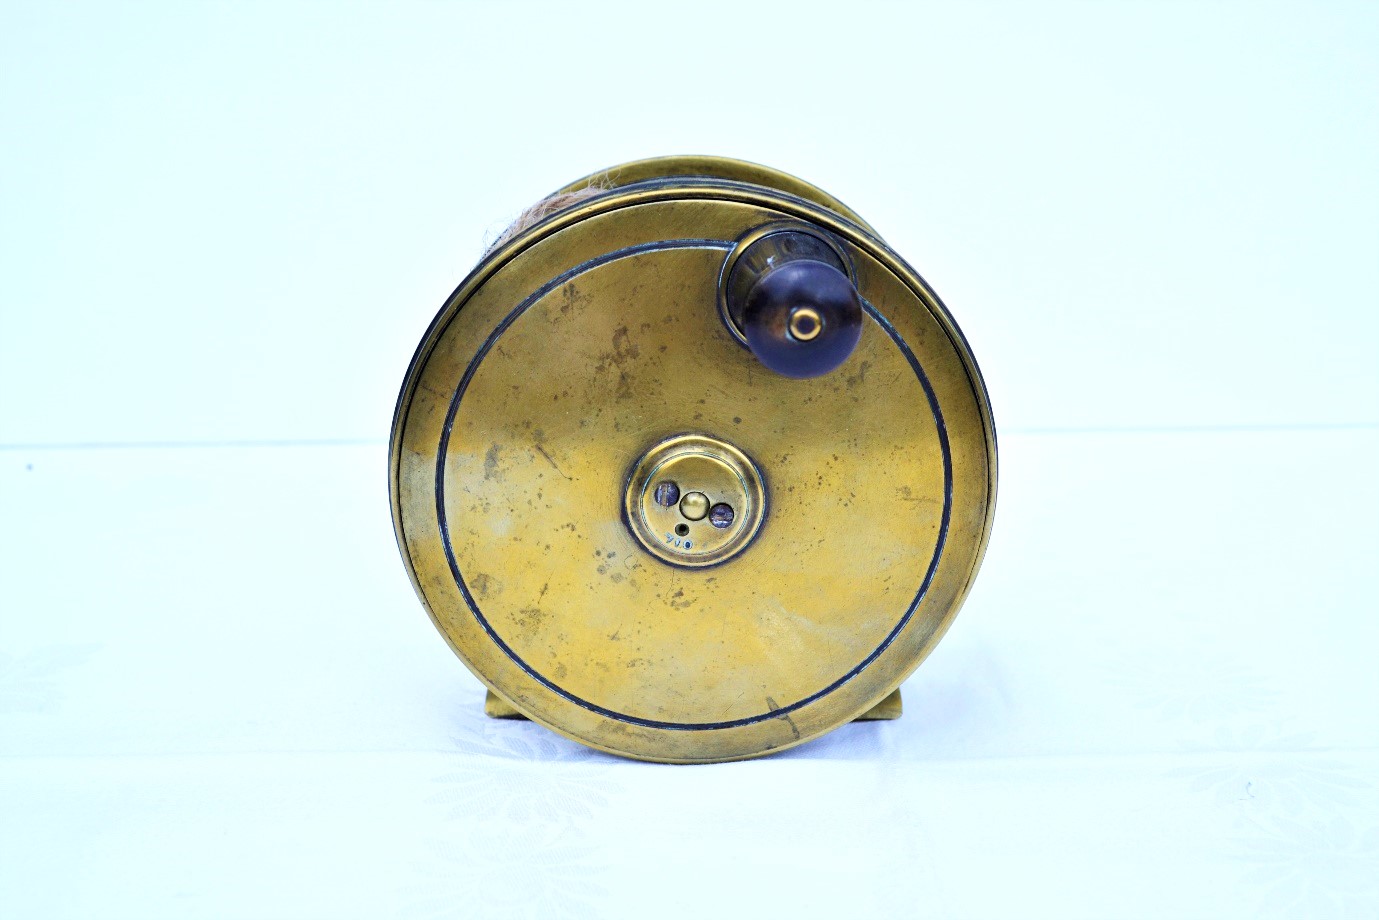 Farlow Patent Lever Salmon Fly Reel – The Old Courthouse, Greyabbey